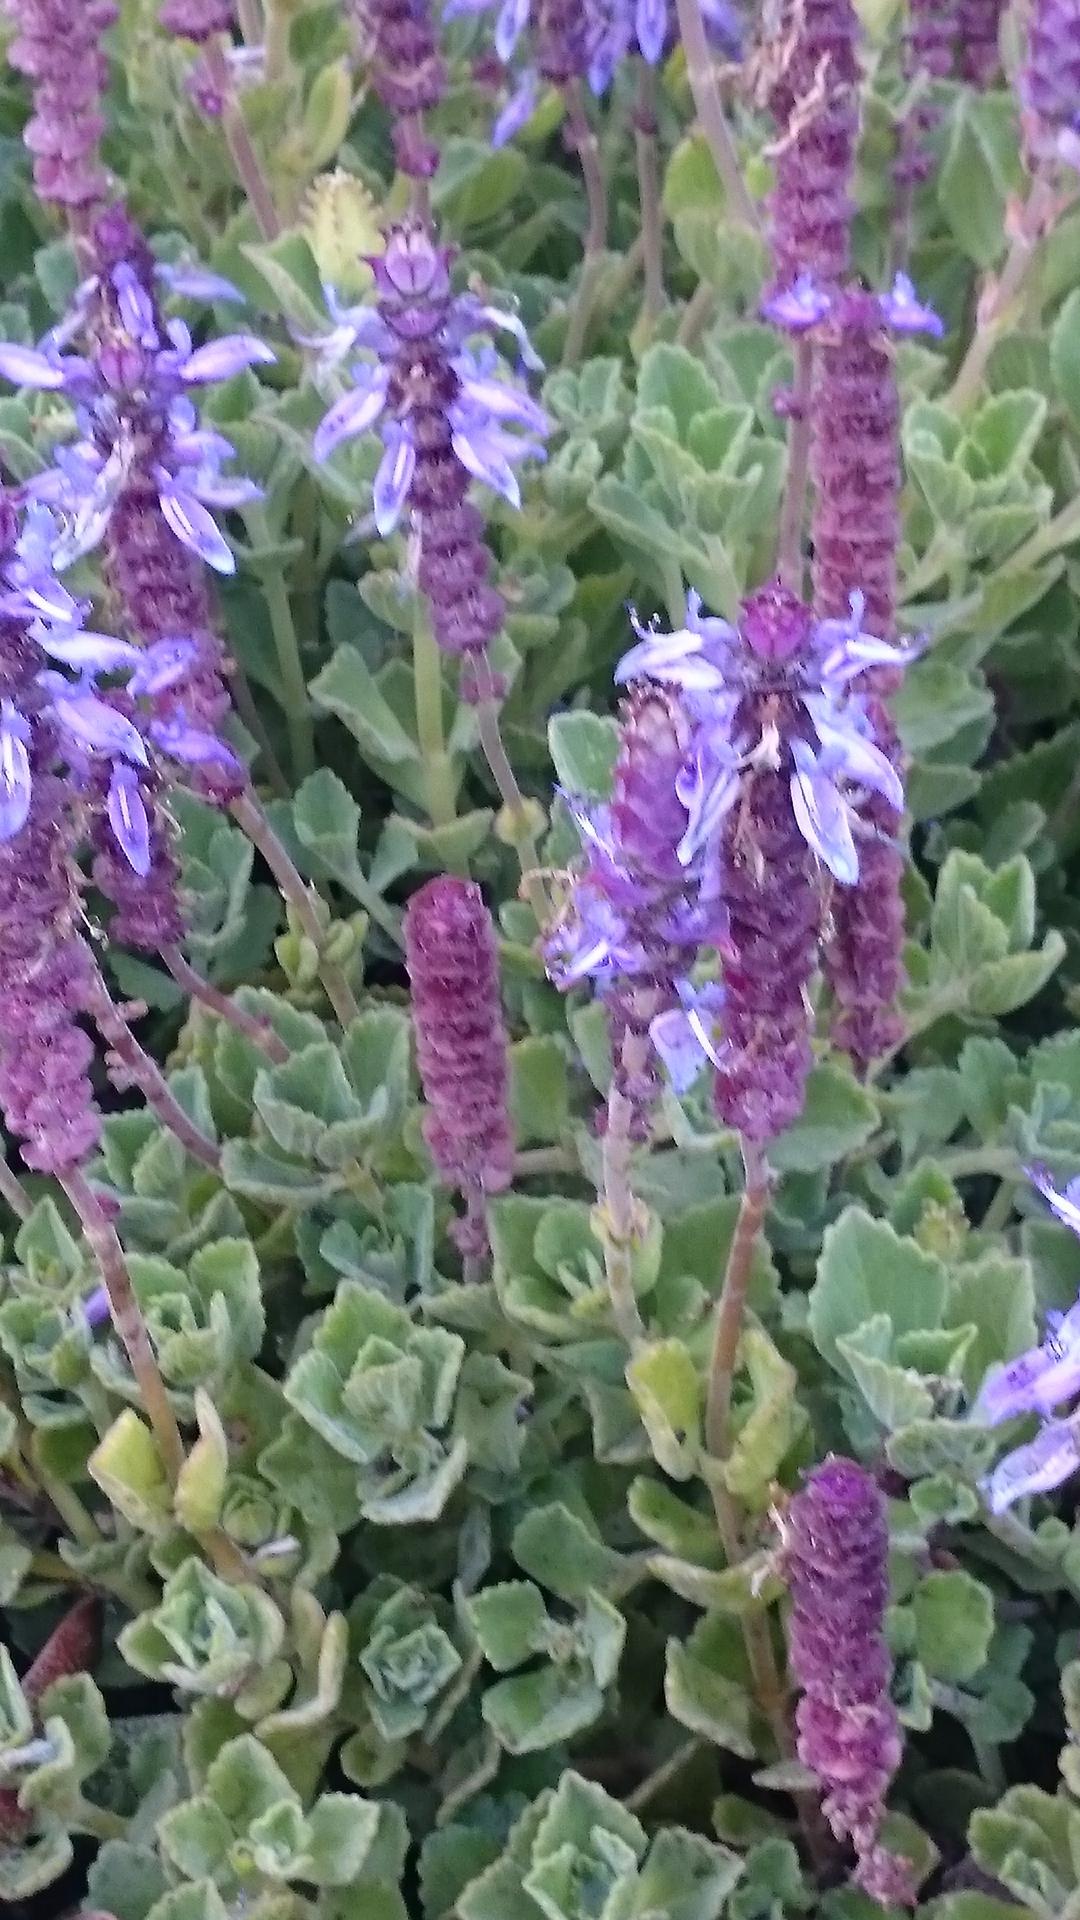 identification - What is this pungent plant with spikes of purple ...